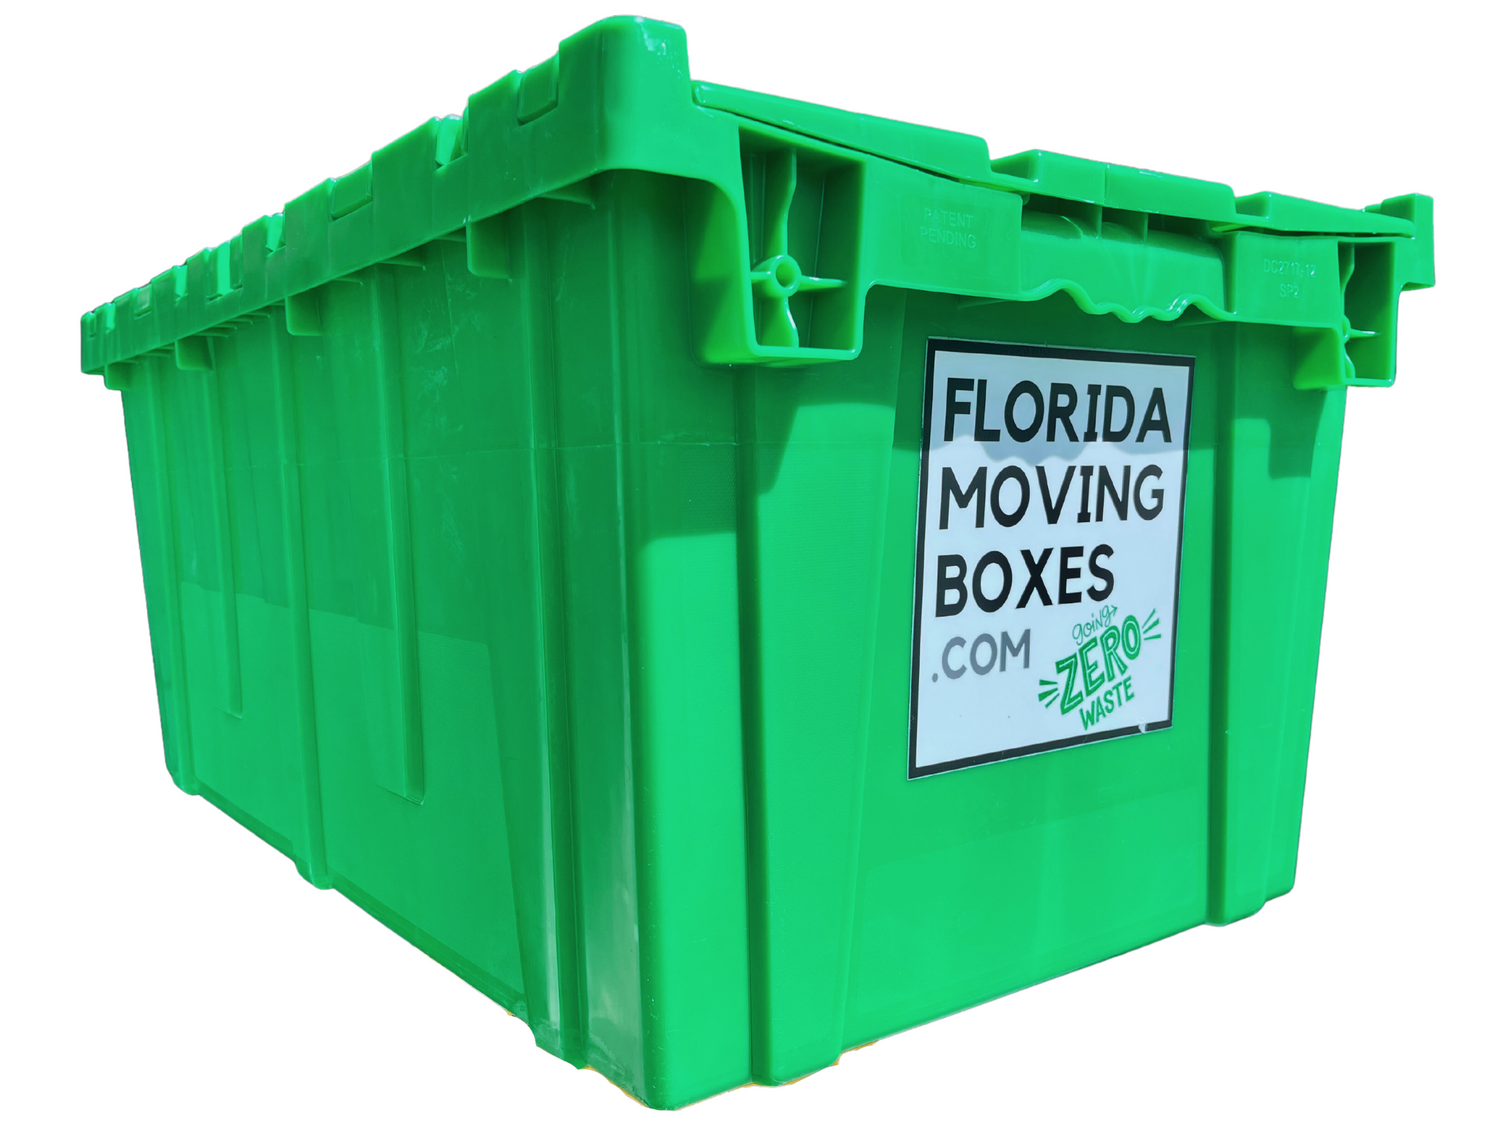 reusable moving boxes. much better than cardboard boxes. Box crate and bin rentals in Orlando Florida for business office and home moves and storage